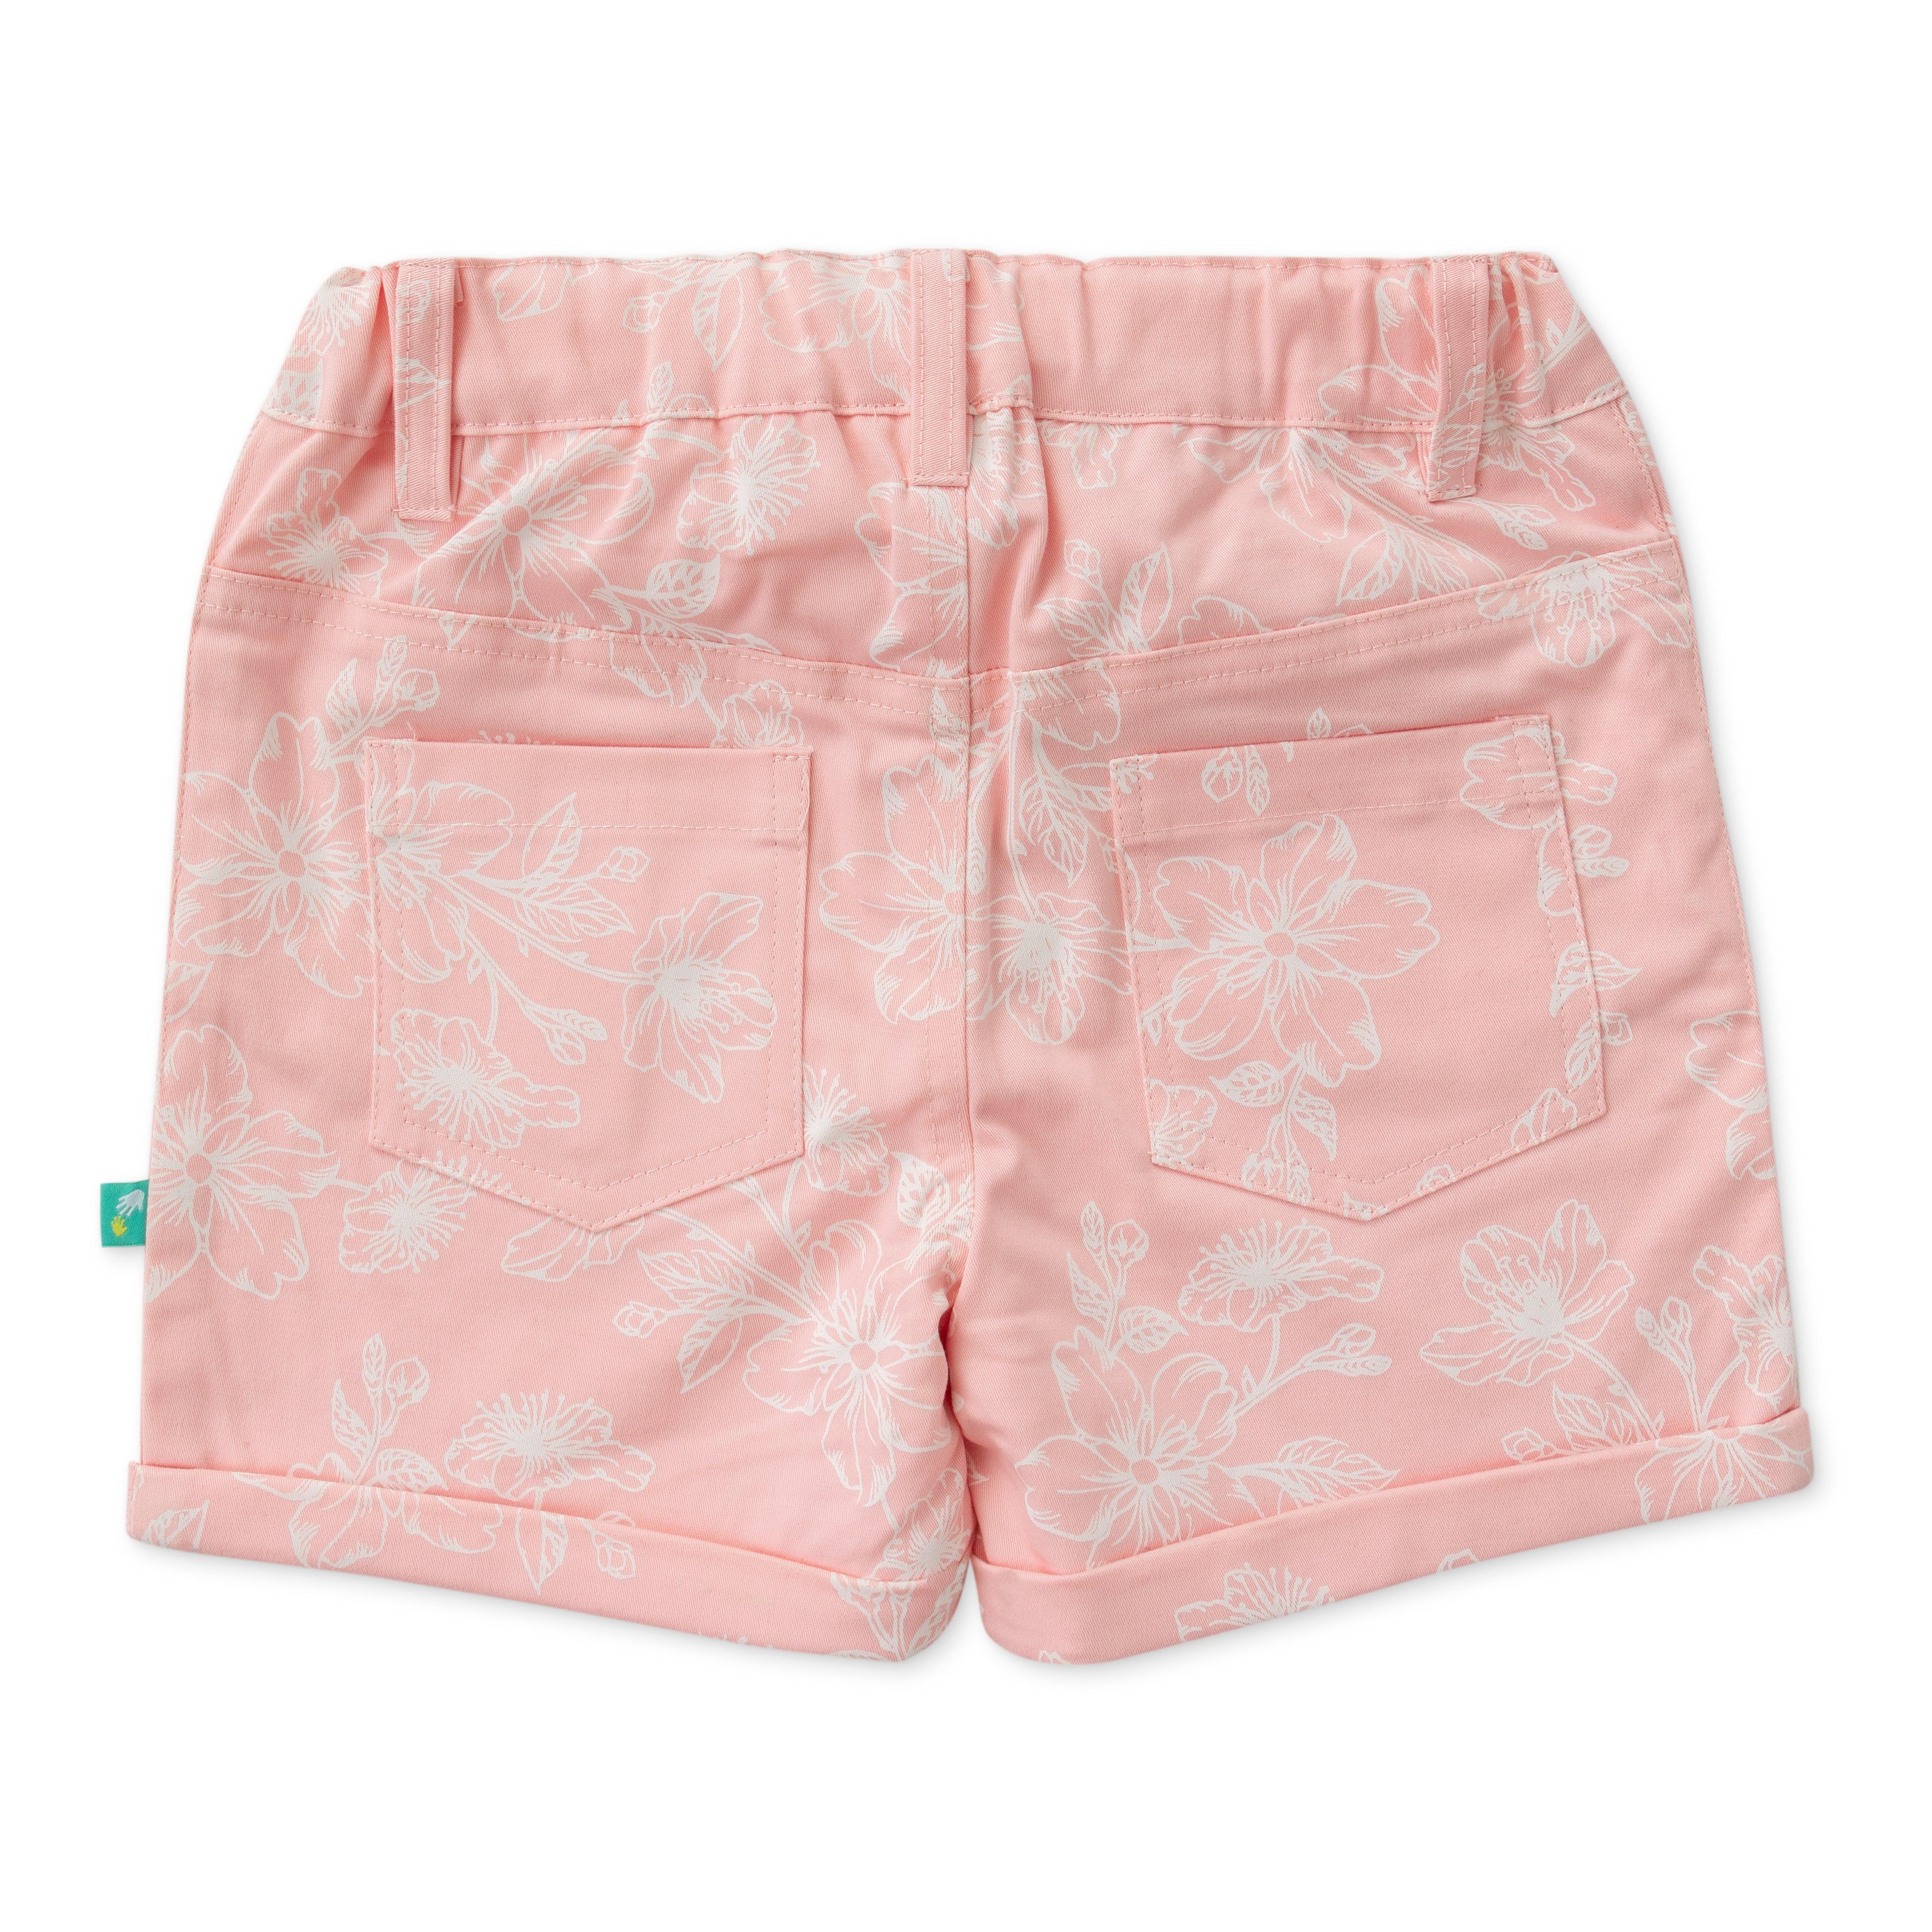 Girls Jersey Toddlers Graphic Printed Shorts - Pink - Juscubs